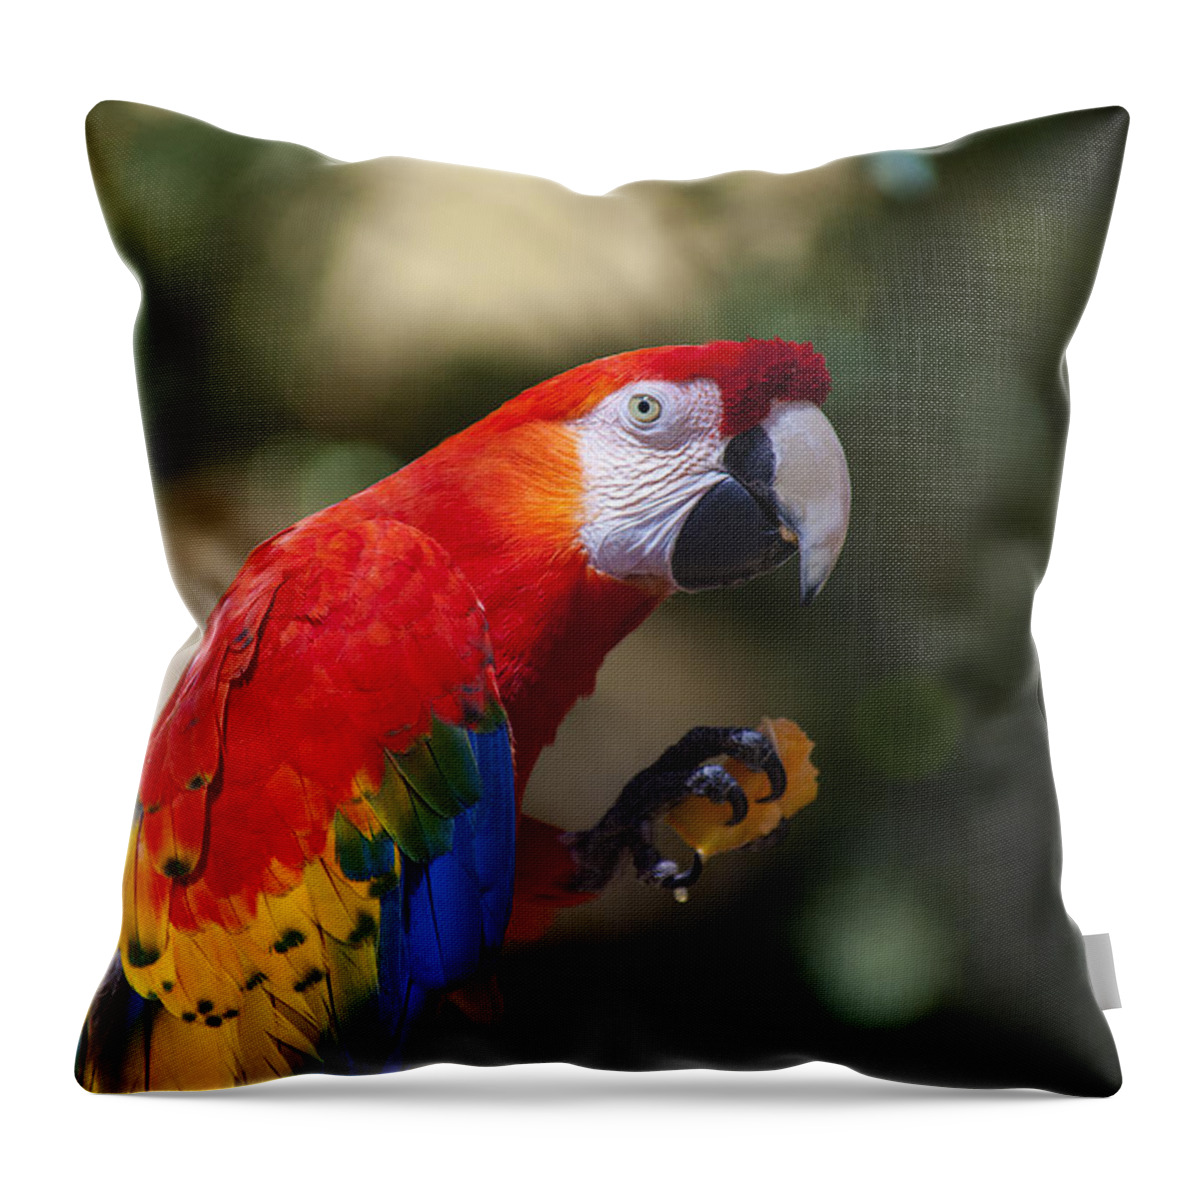 Parrot Throw Pillow featuring the photograph Red parrot by Garry Gay